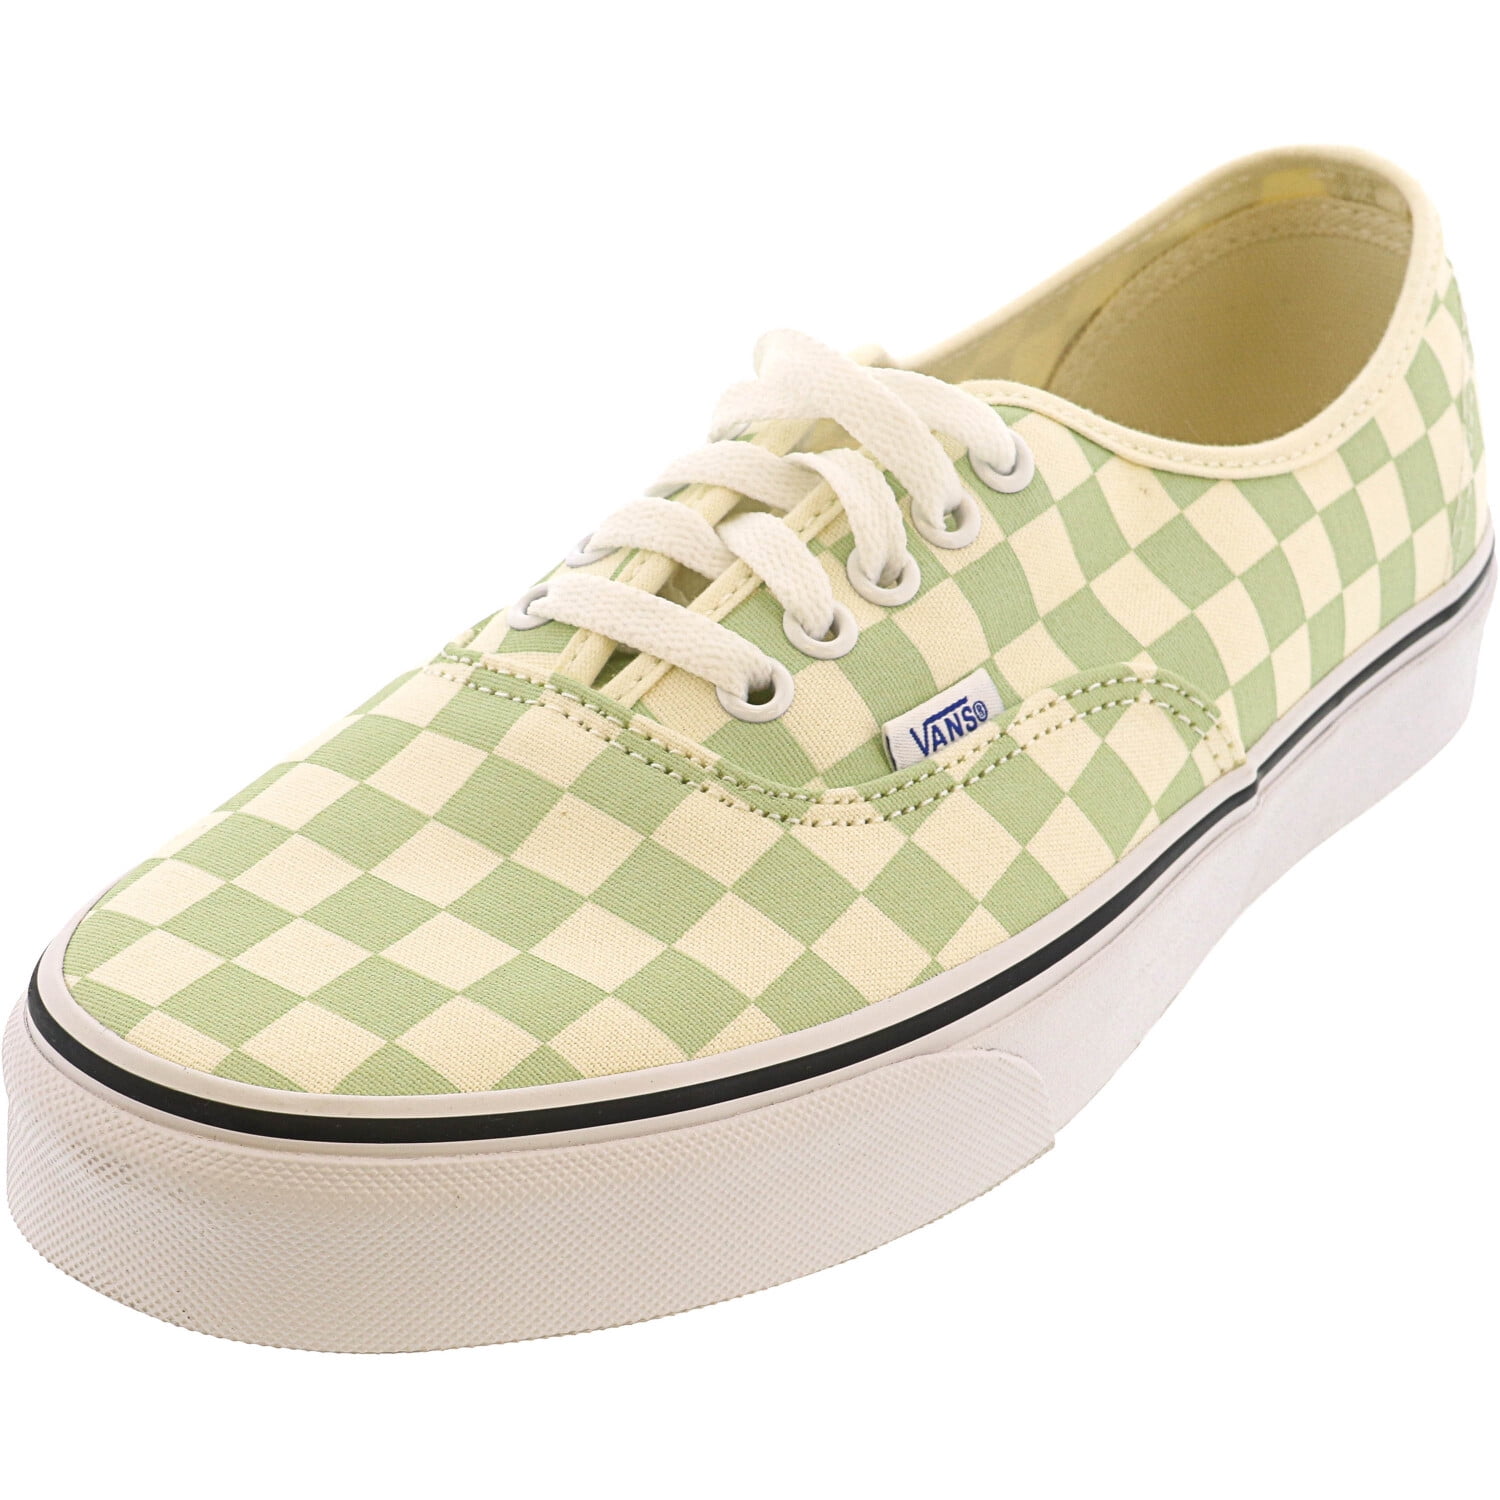 vans authentic checkerboard skate shoes